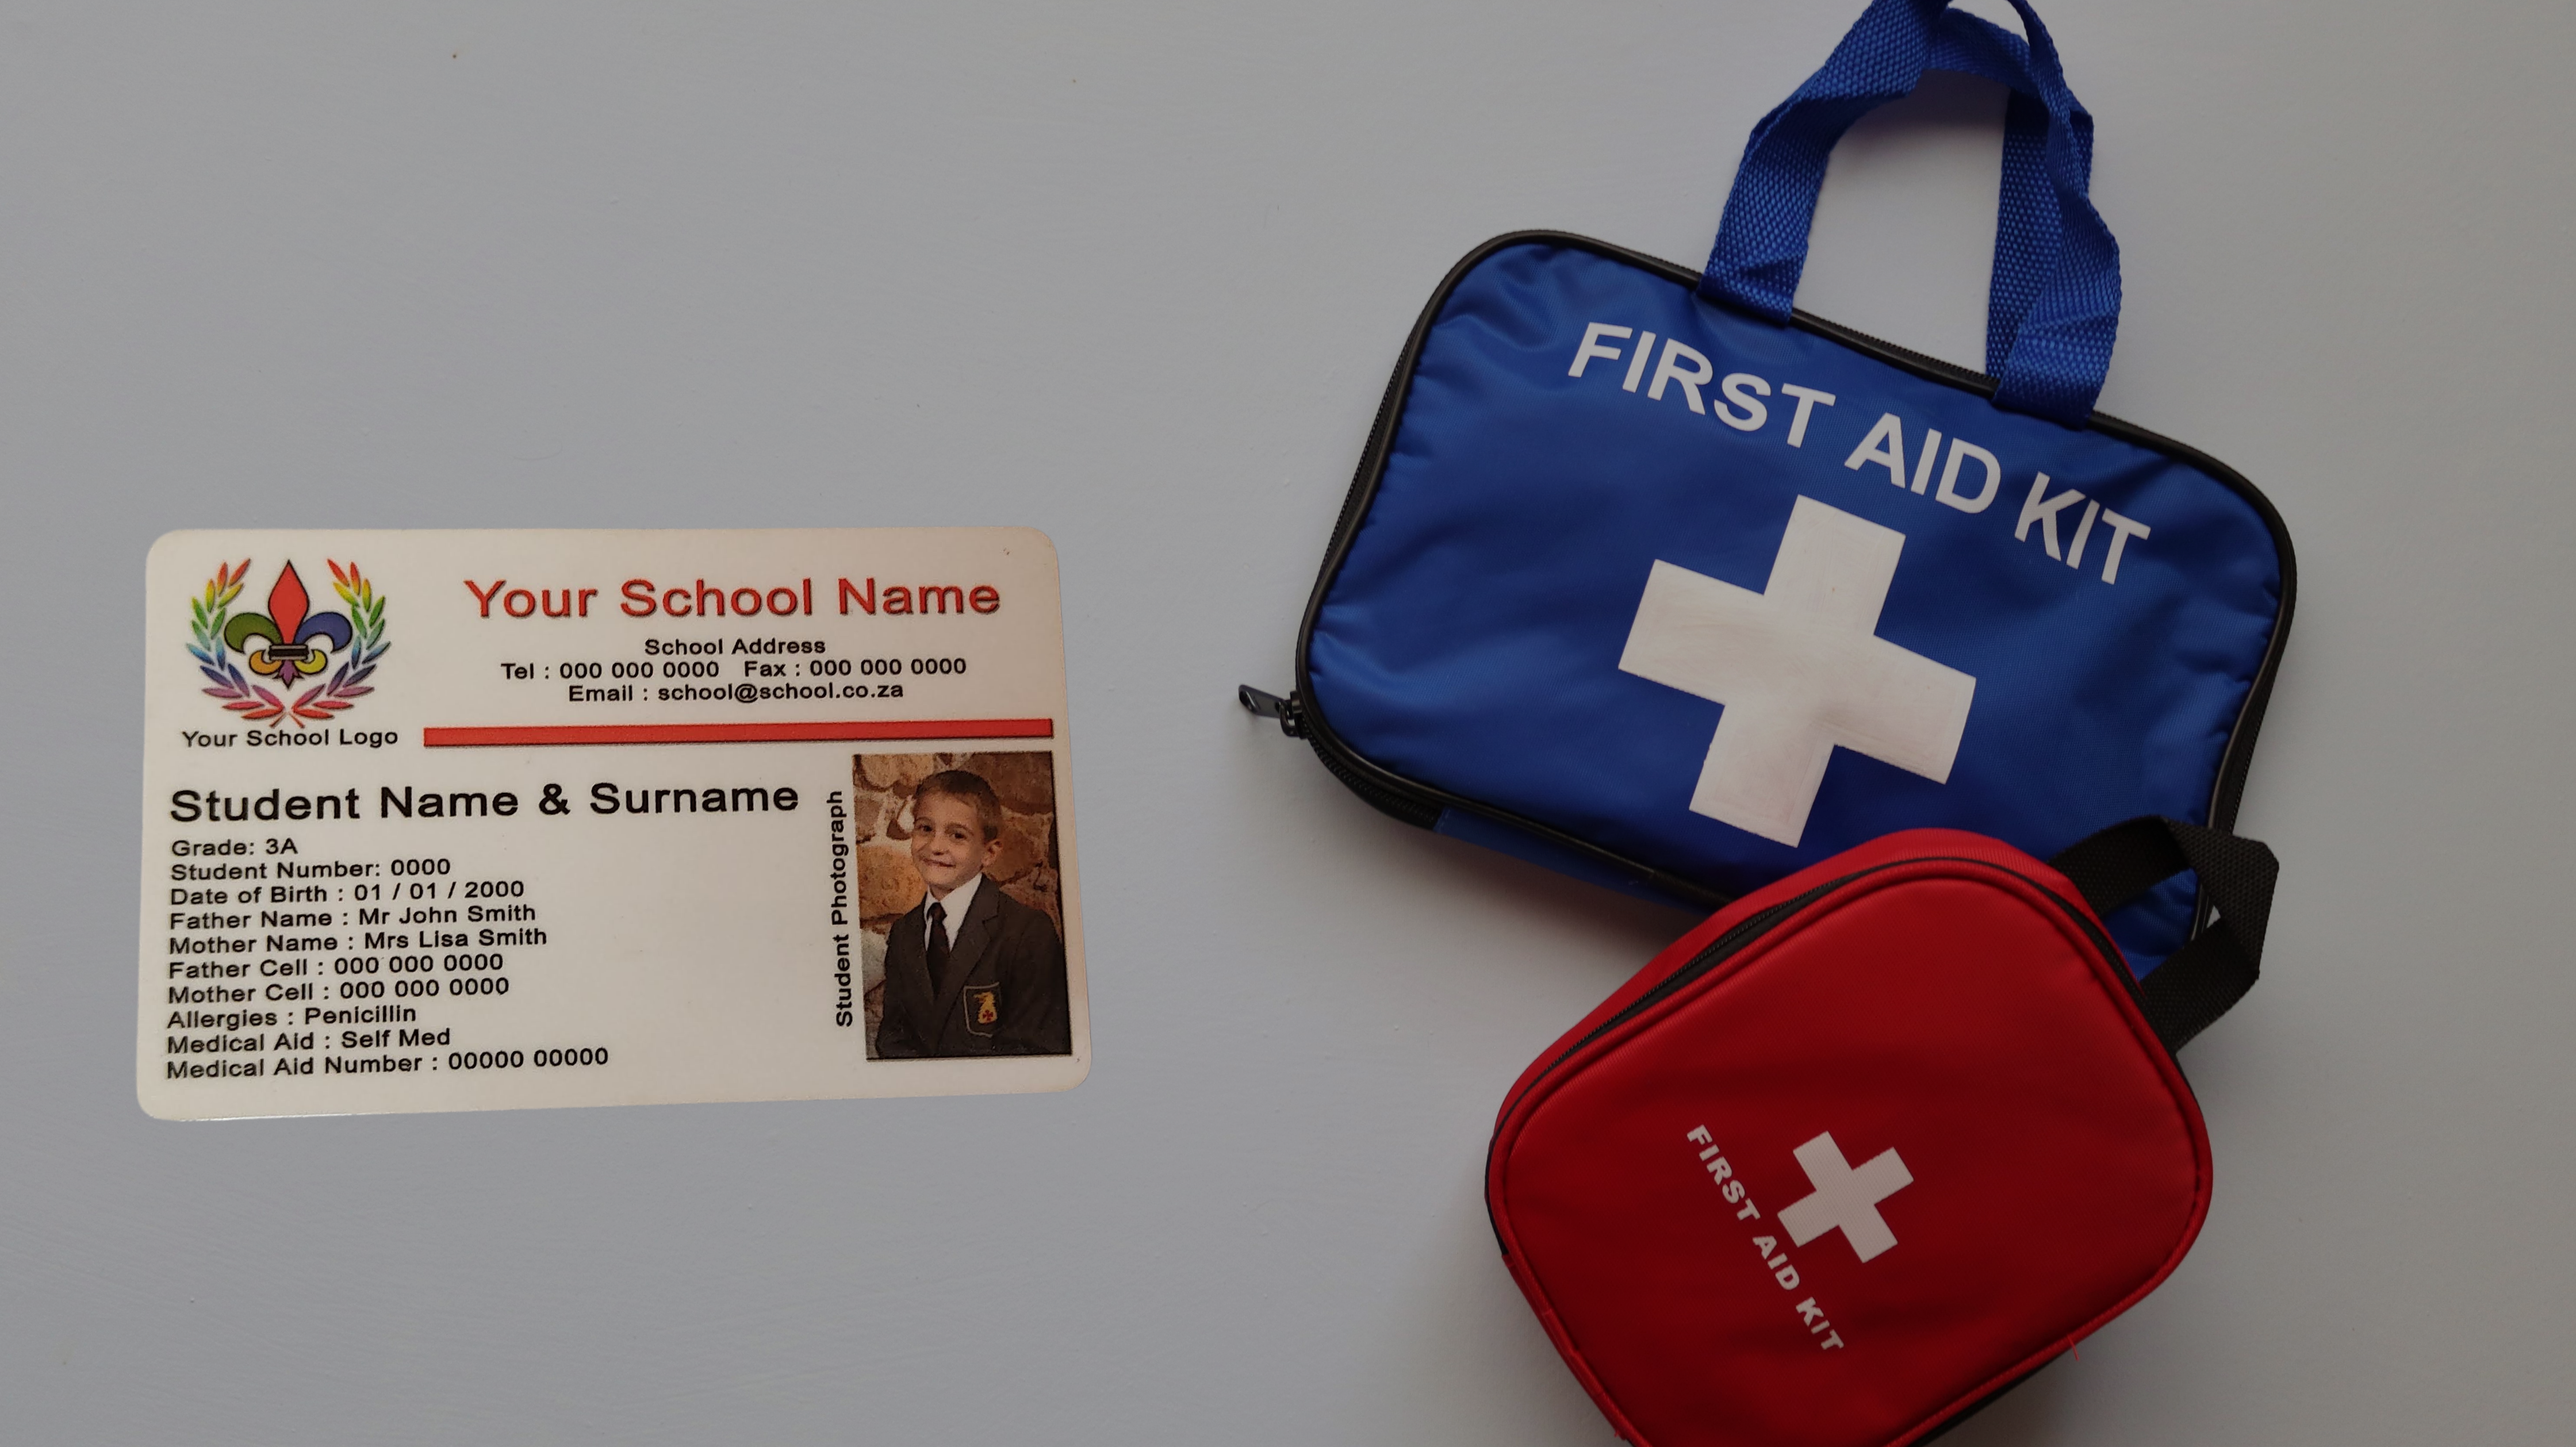 School ID with medical information